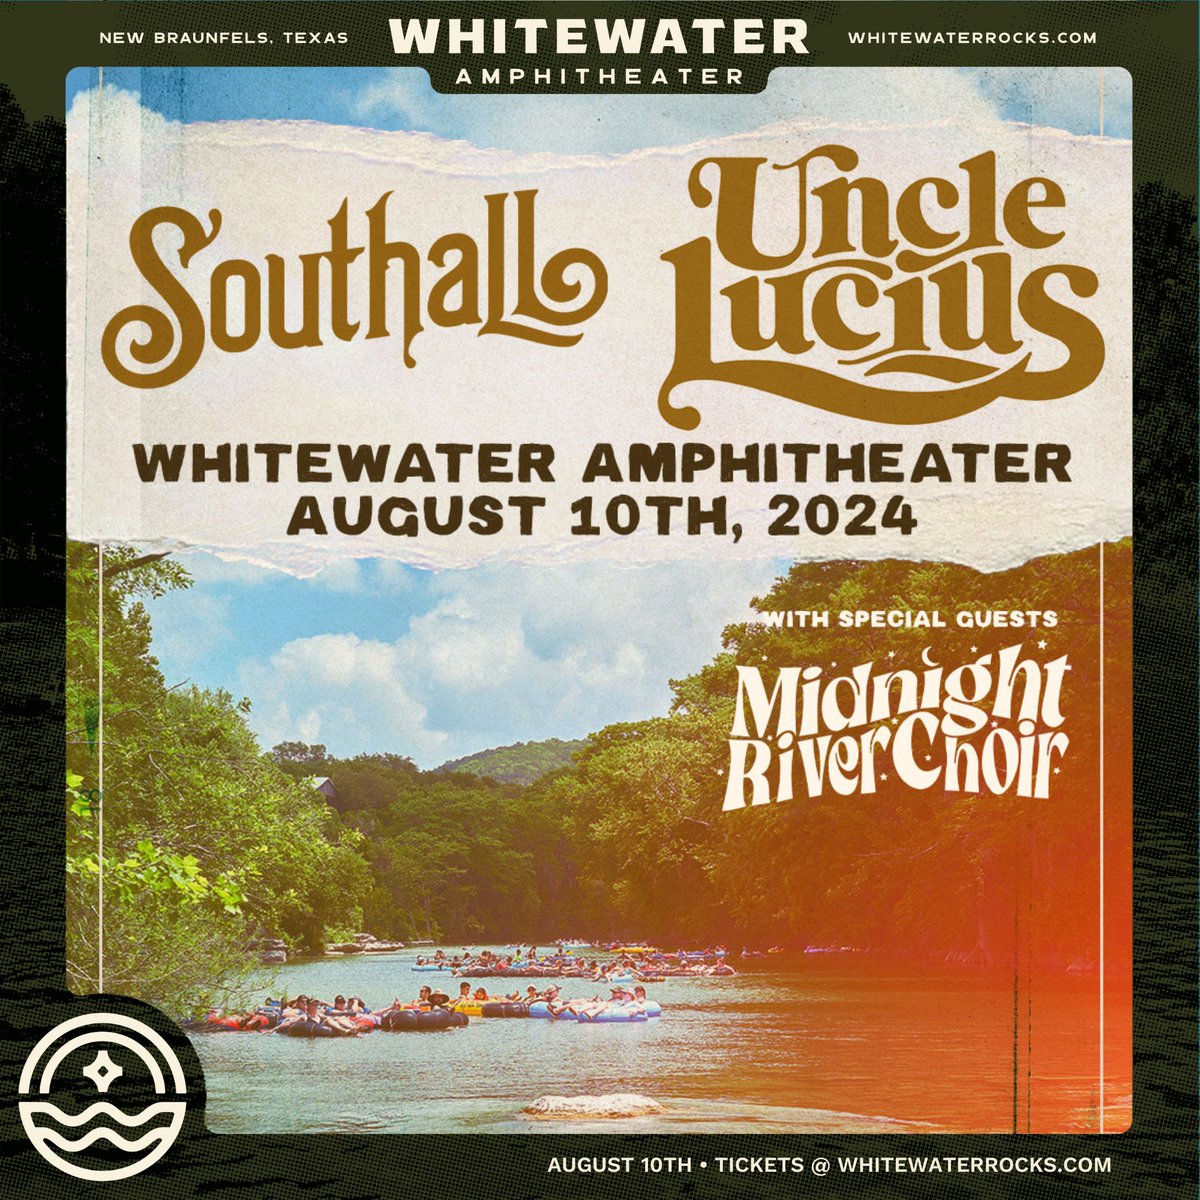 💥 ON SALE NOW! @readsouthall and @unclelucius with @12amriverchoir on August 10th!

Get your tix: bit.ly/SHUL81024

#southall #unclelucius #onsalenow #nbtx #ontheriverunderthestars